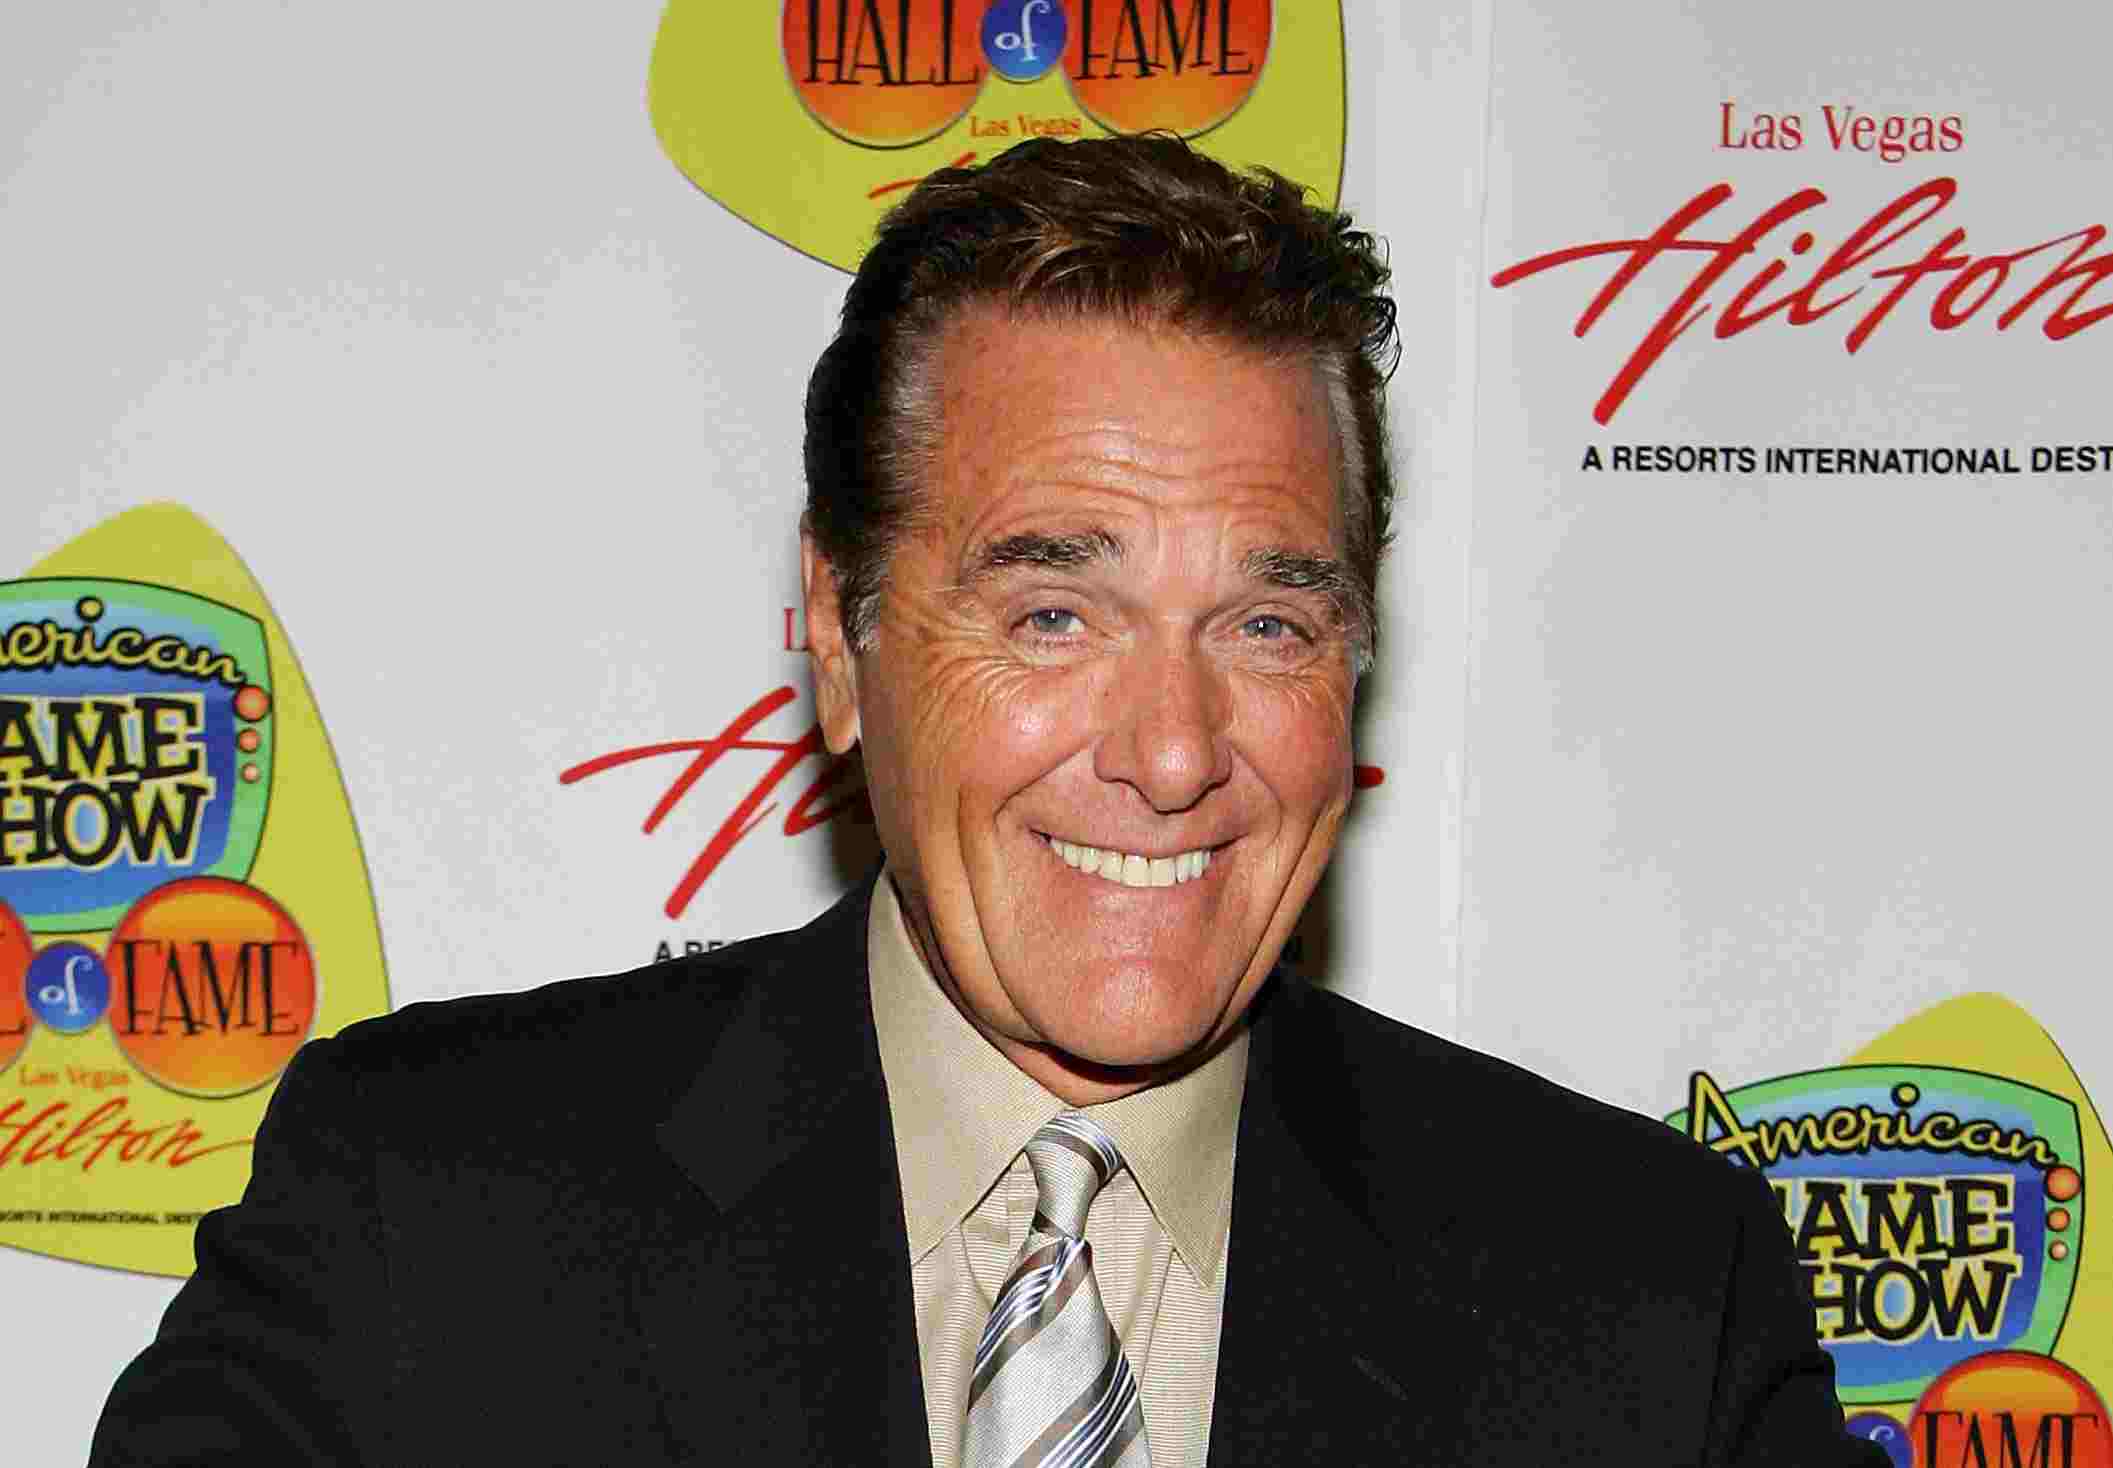 Image of renowned game show host, Chuck Woolery